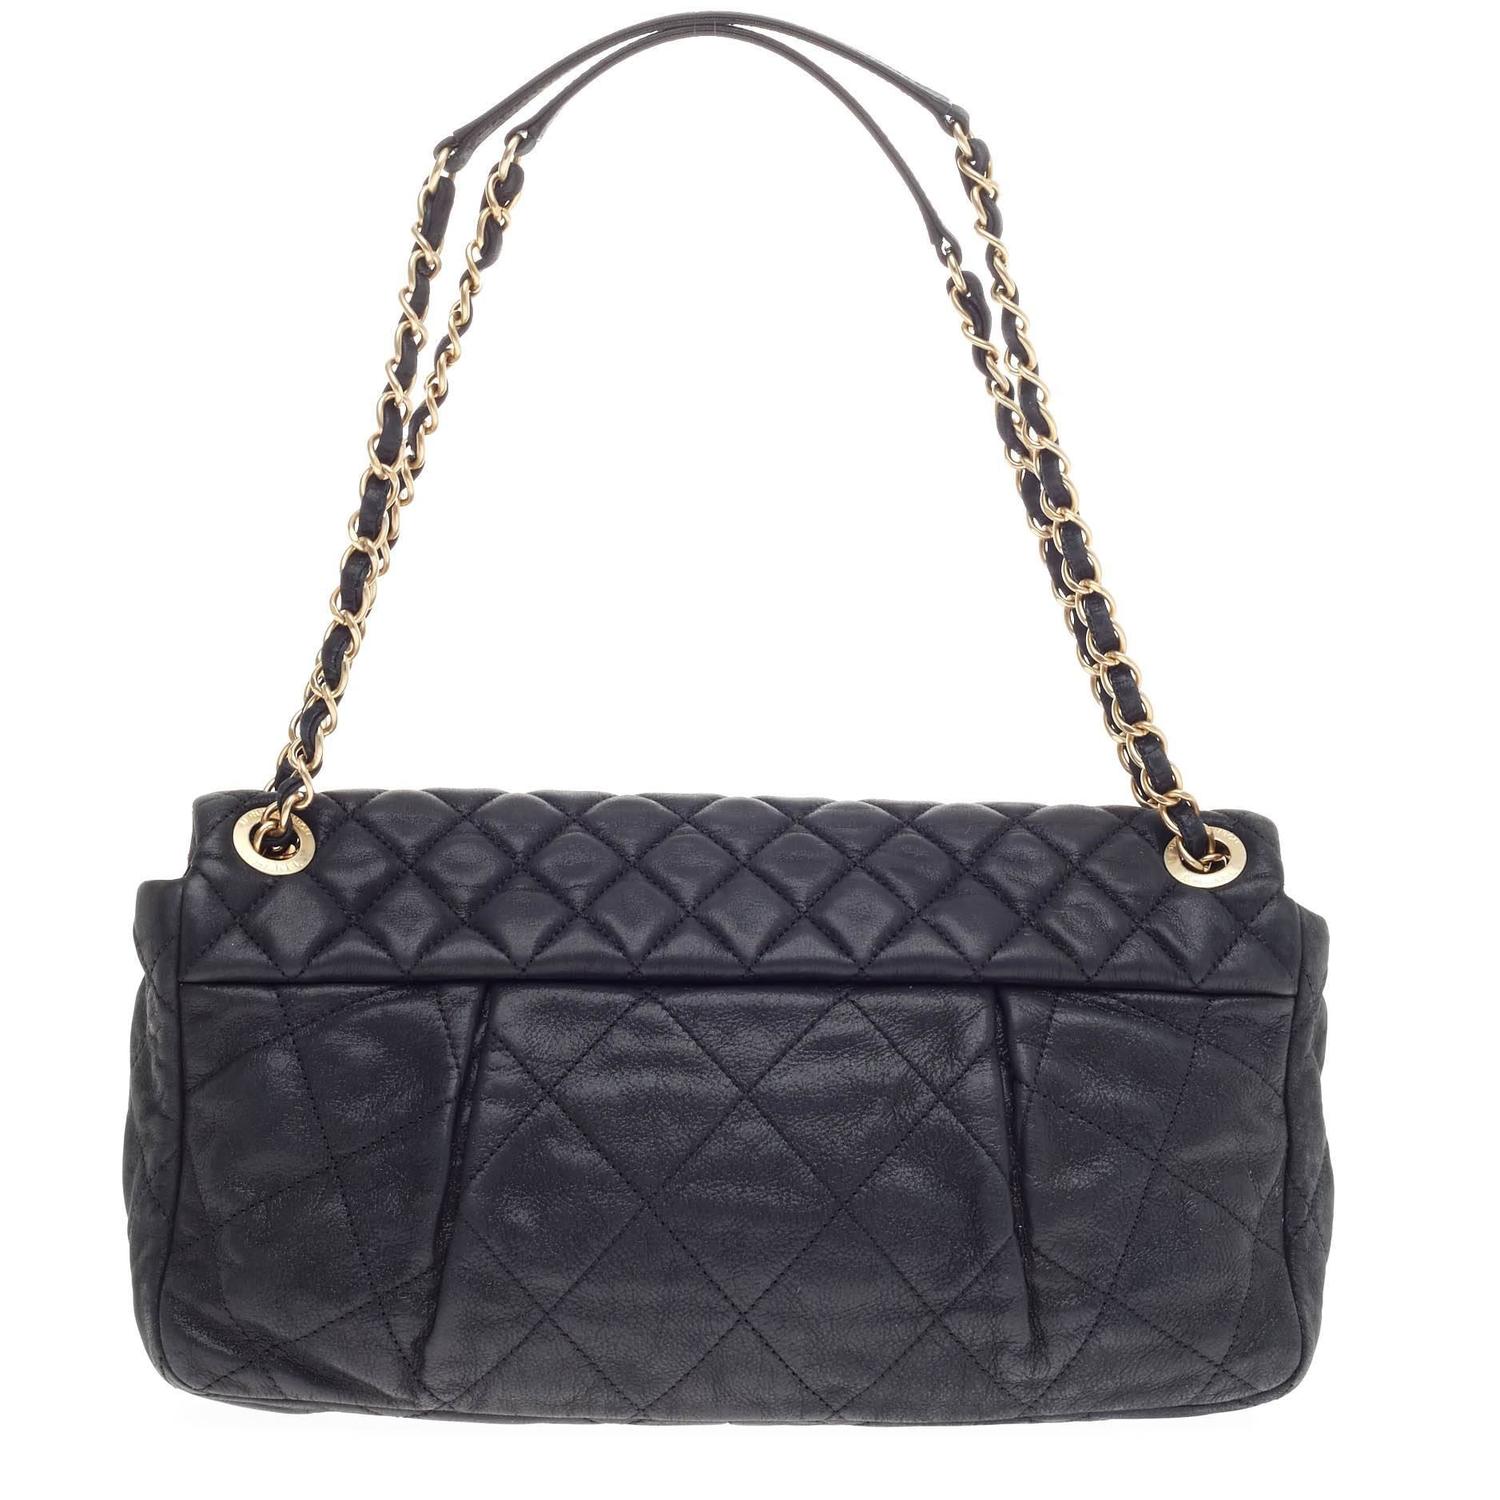 Chanel Chic Quilt Flap Bag Quilted Iridescent Leather Large at 1stdibs